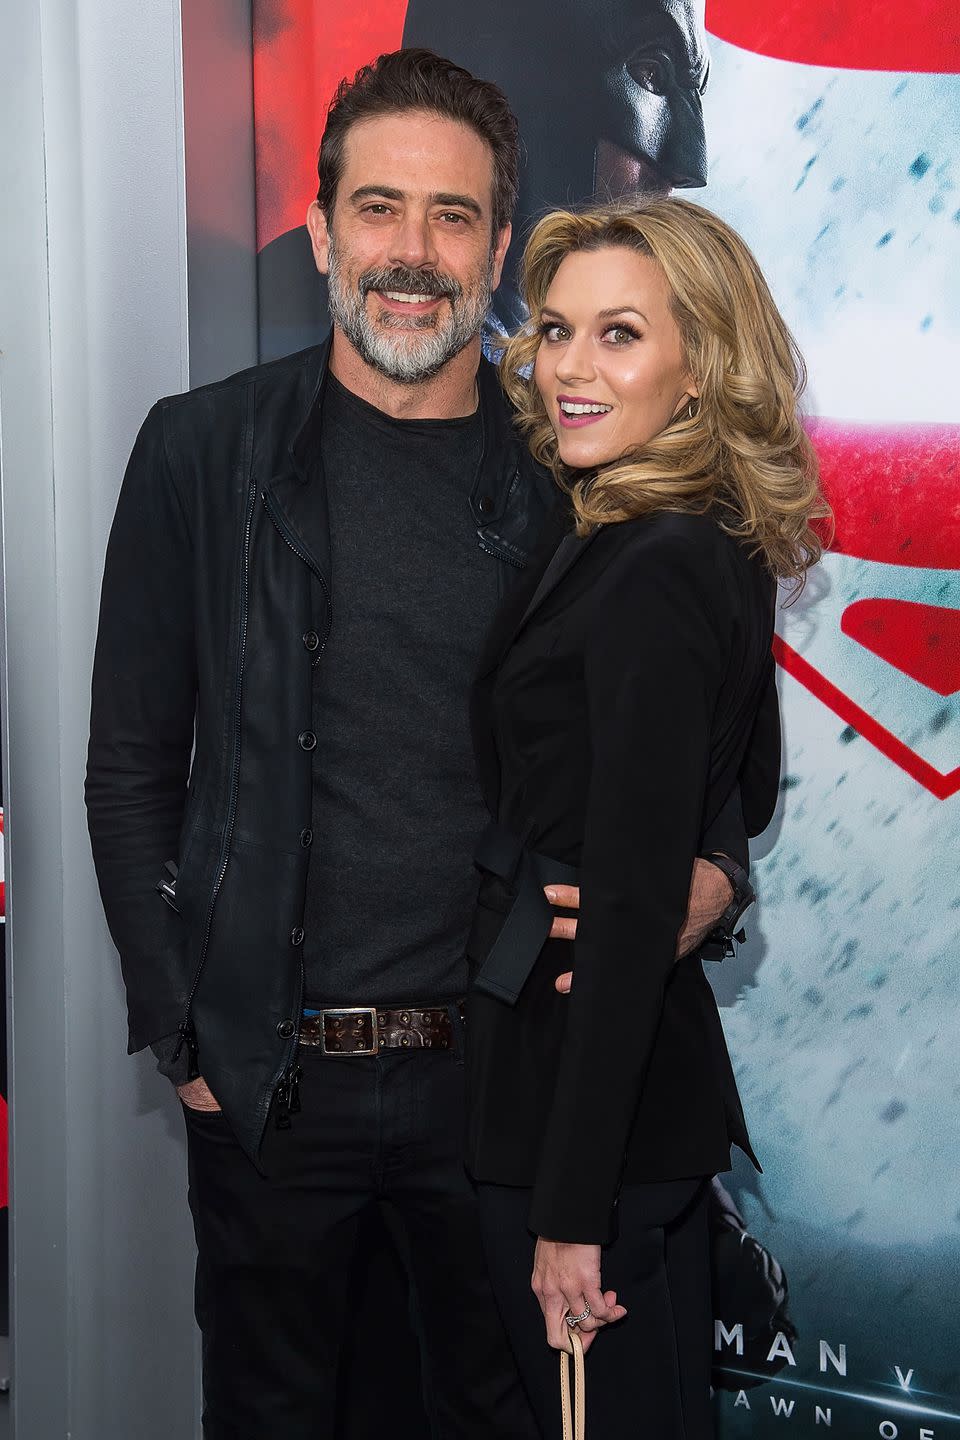 <p>The <em>One Tree Hill </em>actress and <em>The Walking Dead</em>star began dating in 2009 <a rel="nofollow noopener" href="http://www.eonline.com/news/882768/jeffrey-dean-morgan-and-hilarie-burton-inside-the-hollywood-pair-s-private-relationship%22%20%5Cl%20%22photo-848805" target="_blank" data-ylk="slk:after being set up" class="link ">after being set up</a> by Morgan’s <em>Supernatural</em> co-star, Jensen Ackles. The couple welcomed sone Gus in 2010, and were married in 2014. They recently welcomed a daughter, George Virginia, in 2018. </p>